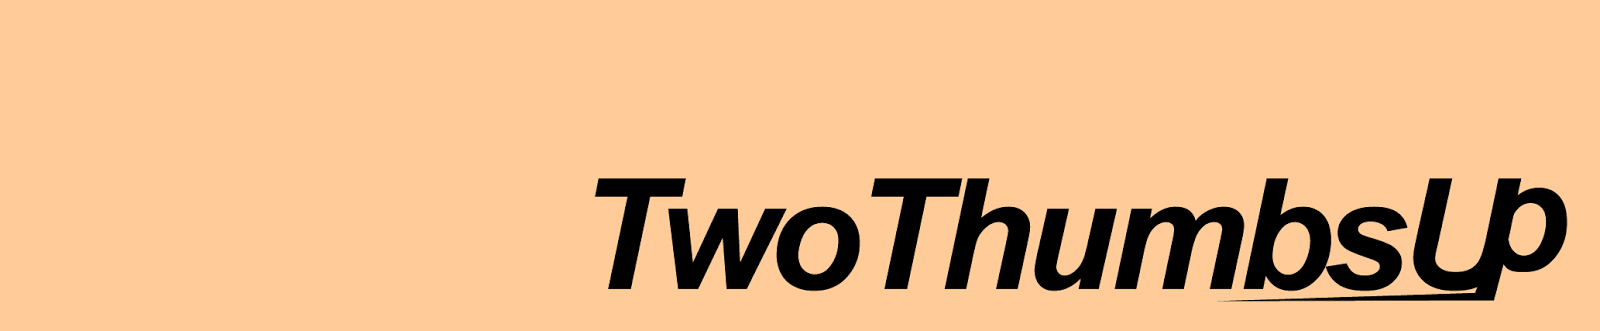 TwoThumbsUp Official Webblog